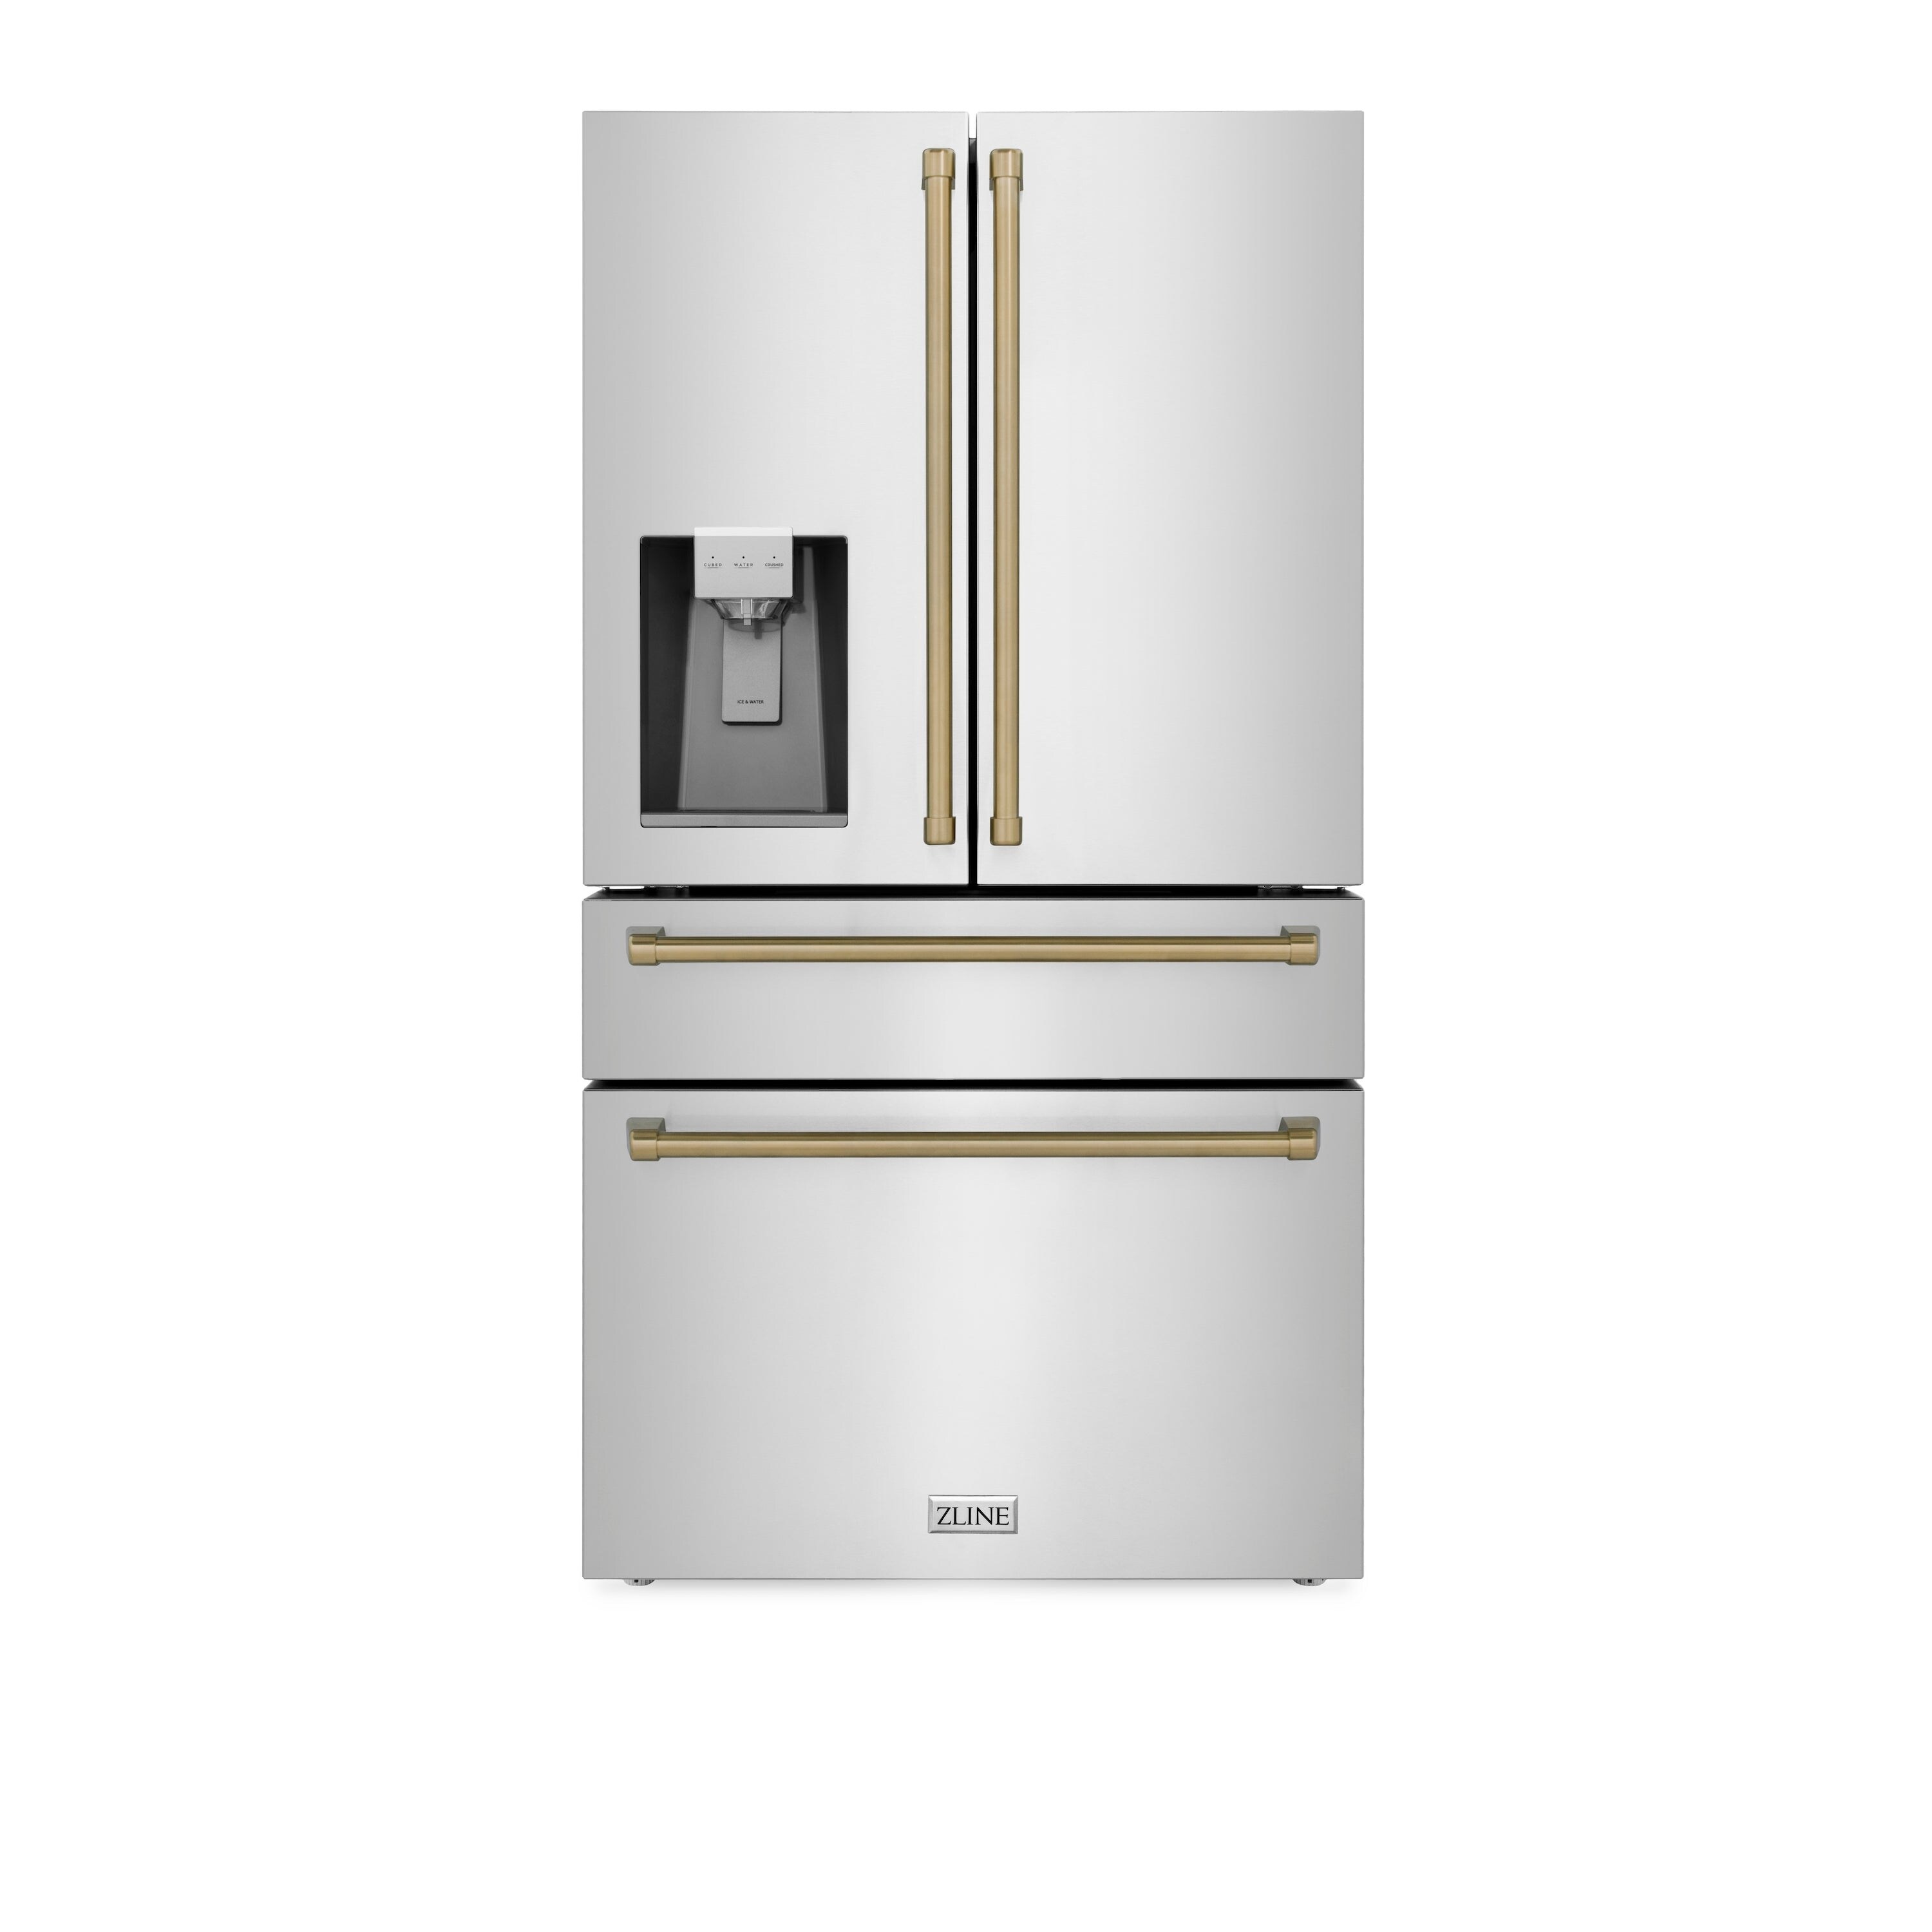 2 Doors - Small Refrigerator Energy-Efficient Compact Refrigerator - Small  Fridge for Bedroom Dorm Office Apartment (Champagne)